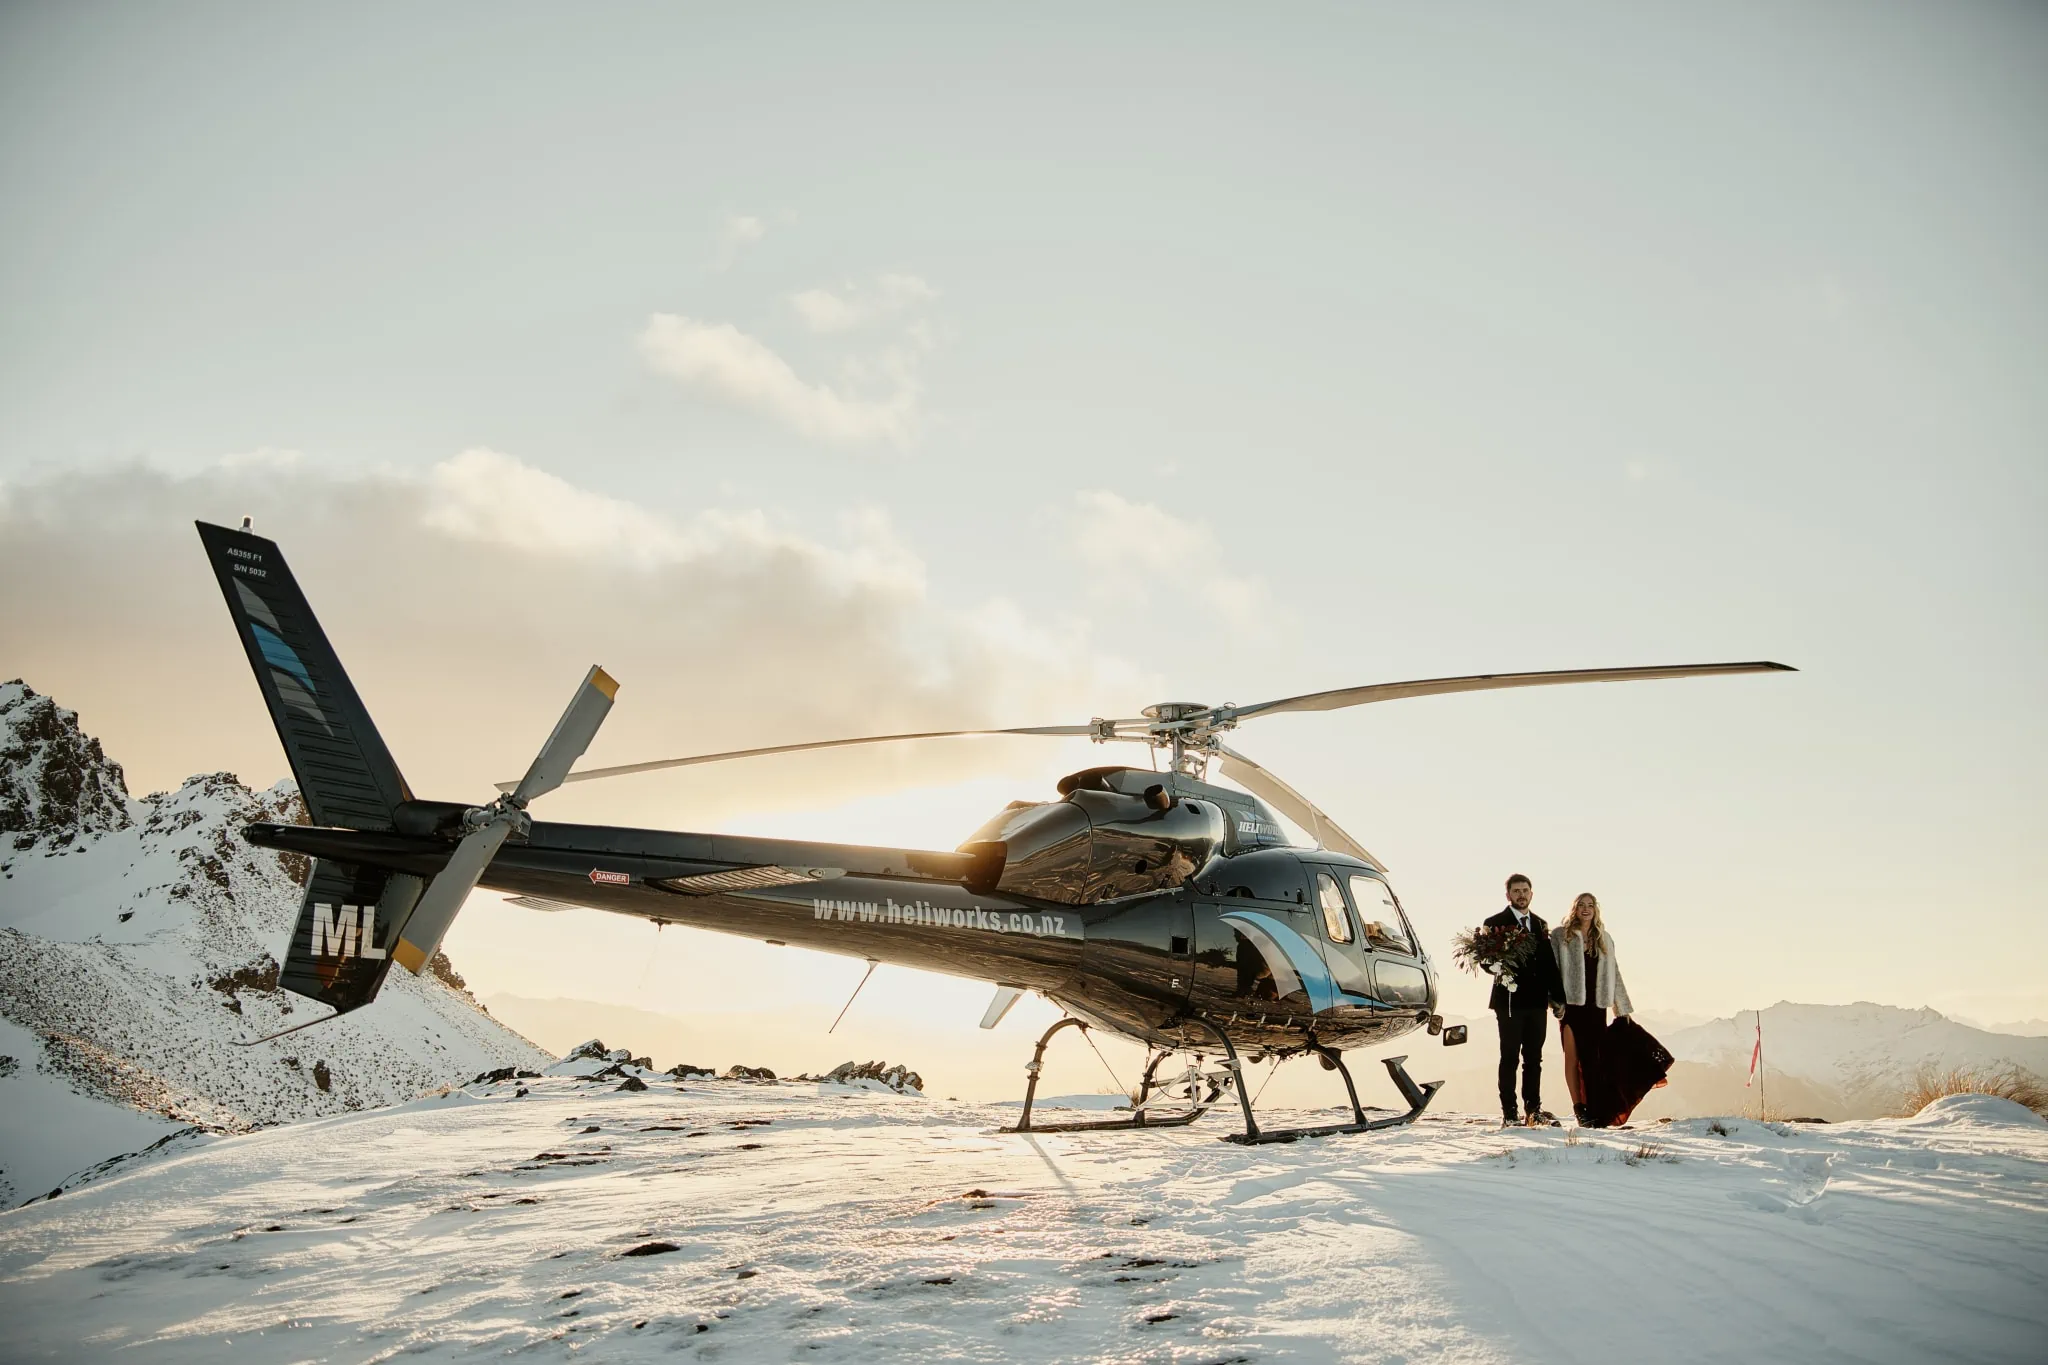 Claire and Rob posing with a helicopter in the snow during their Heli Elopement Wedding at Cecil Peak.